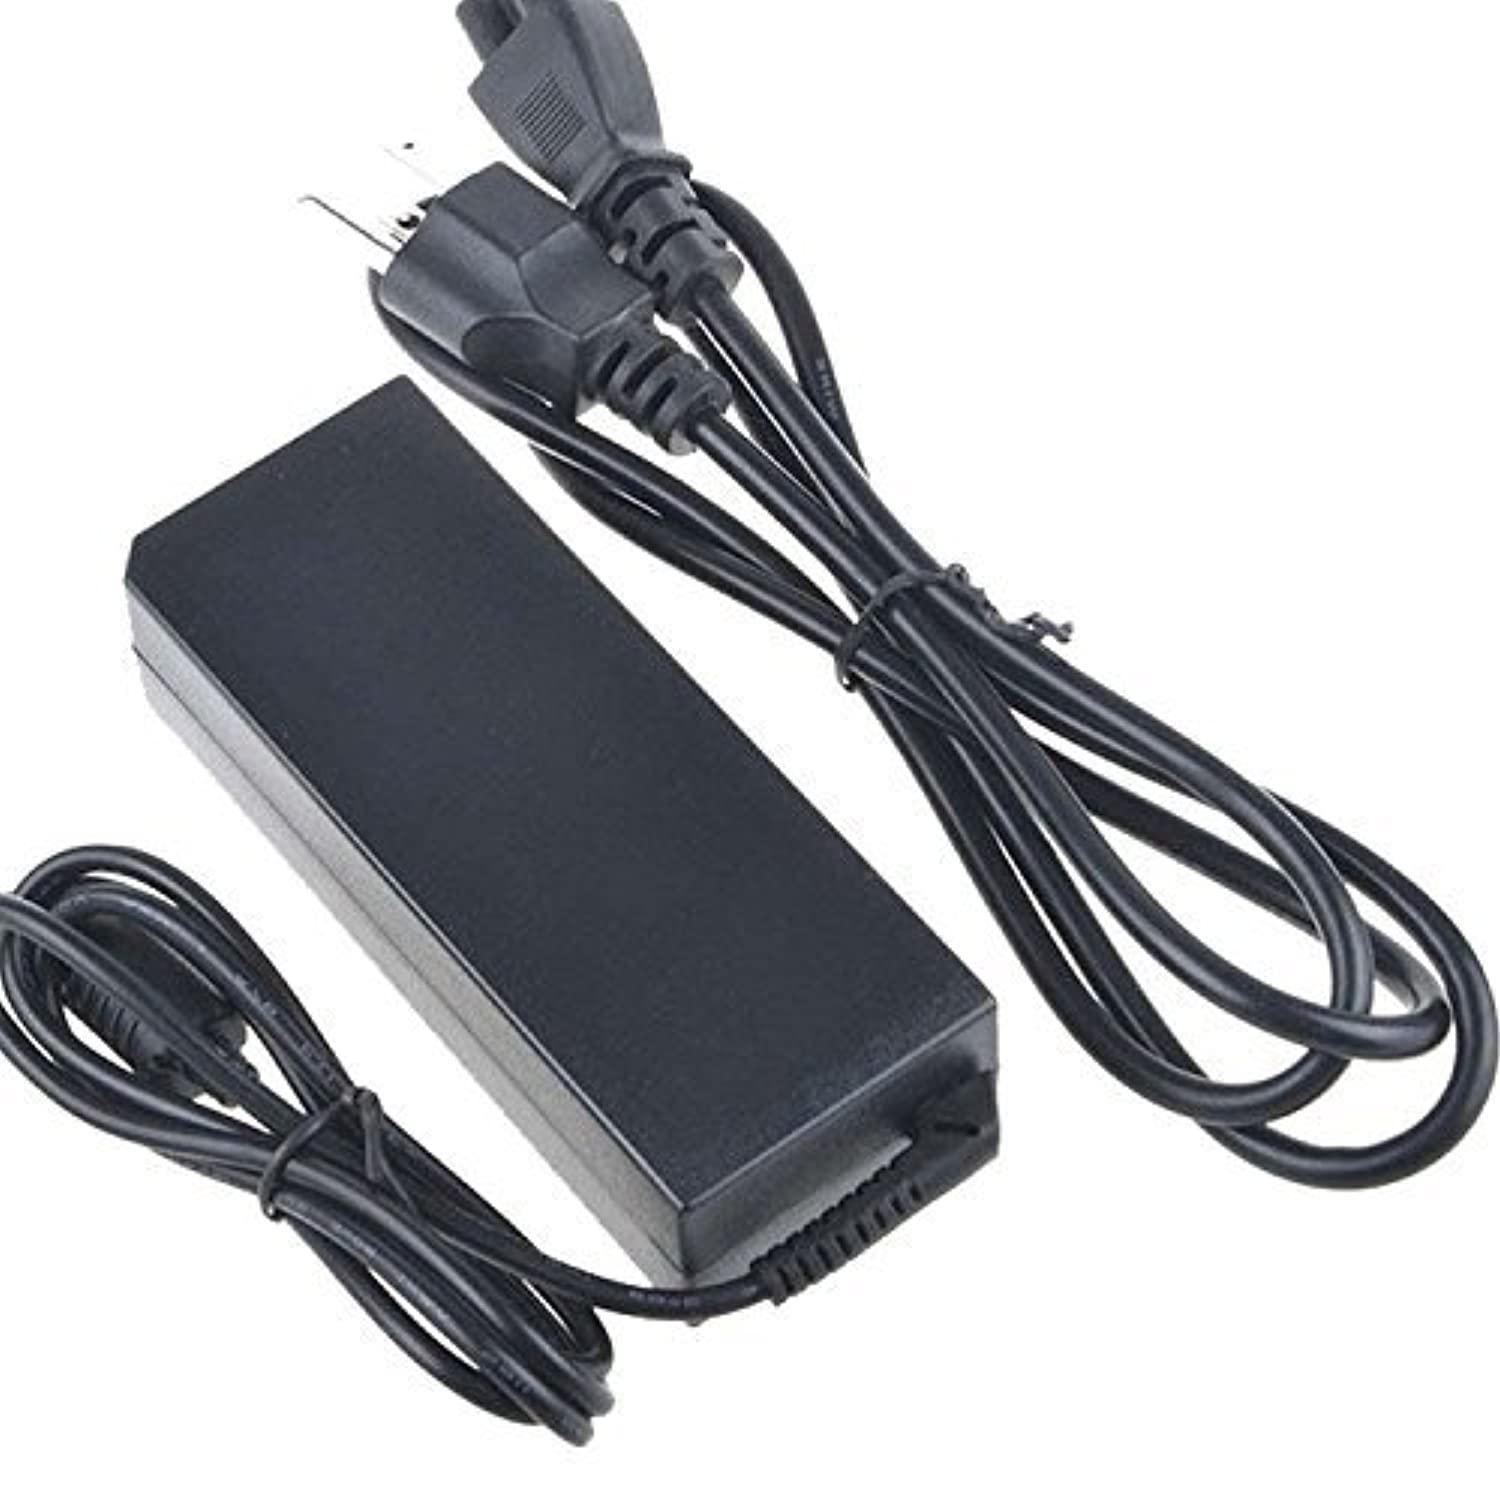 marg 24v ac/dc adapter for mitel 5010 5020 5140 5220 5240 5224 5212 ip phones dual mode voip phone 5550 ip console 5410 5412 